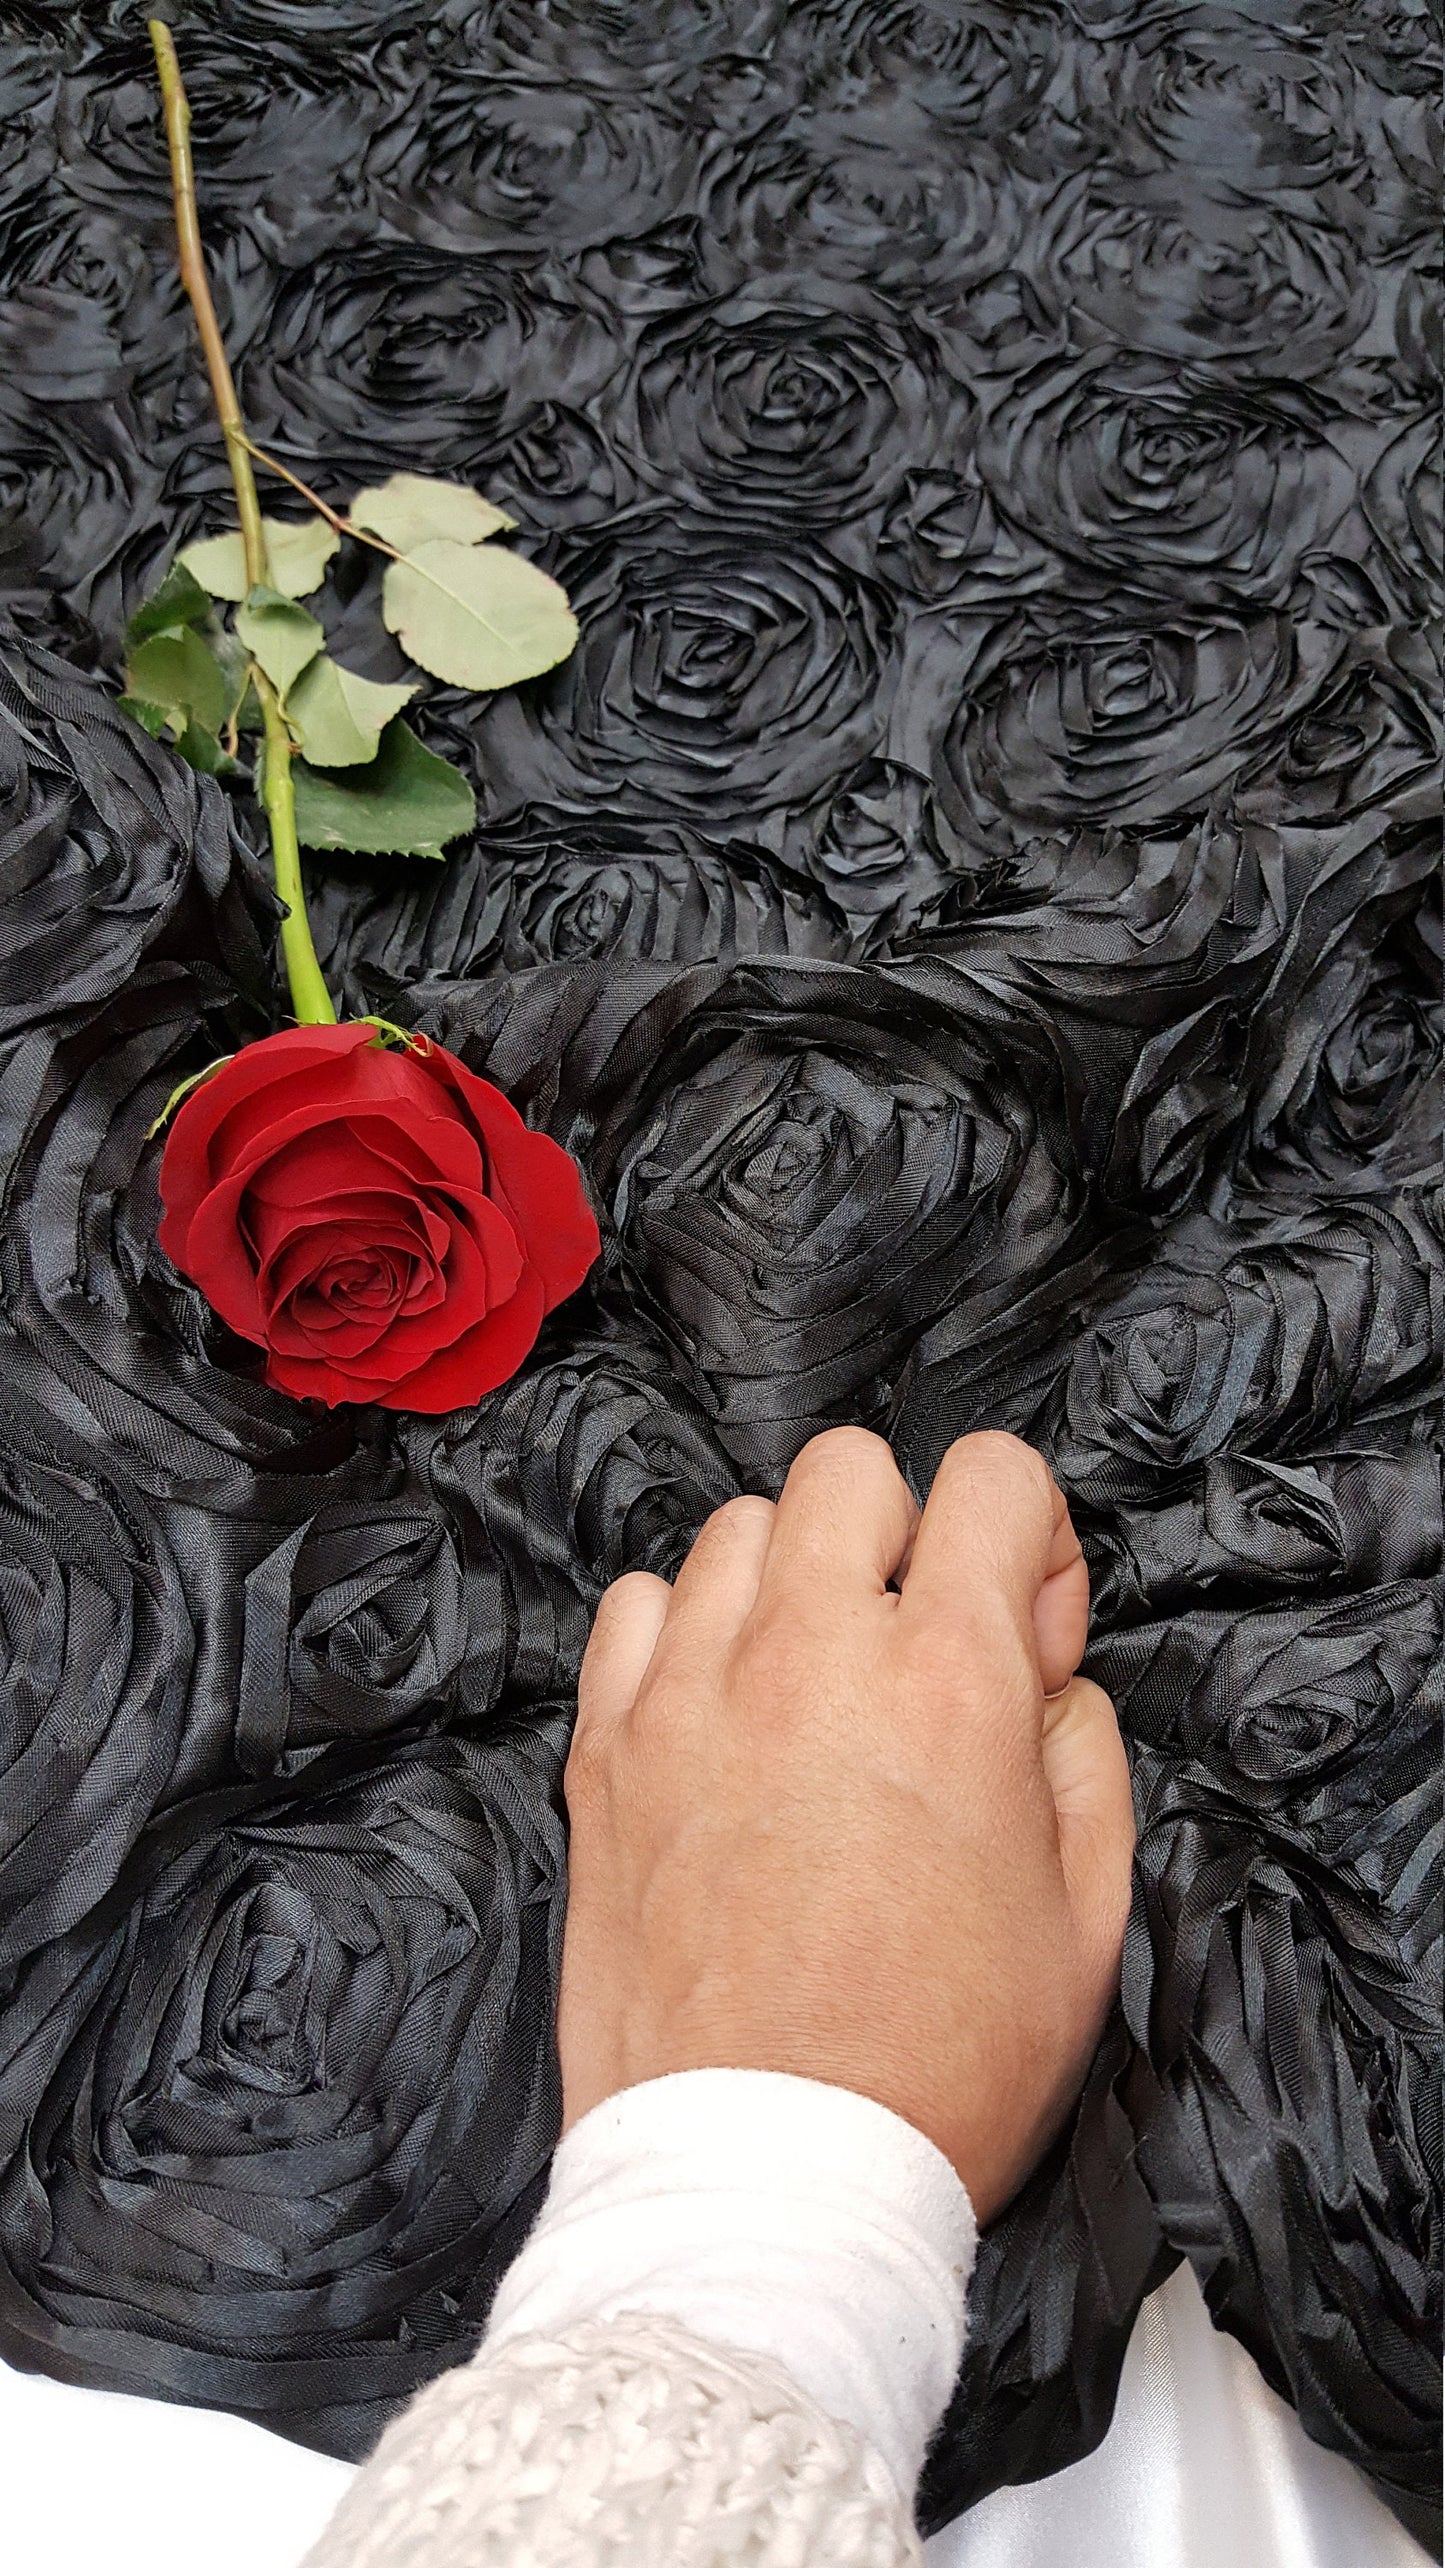 Black Satin Rosette Fabric by the Yard runners table cloths dress gown fabric to make mono mono roses satin floral flowers satin black